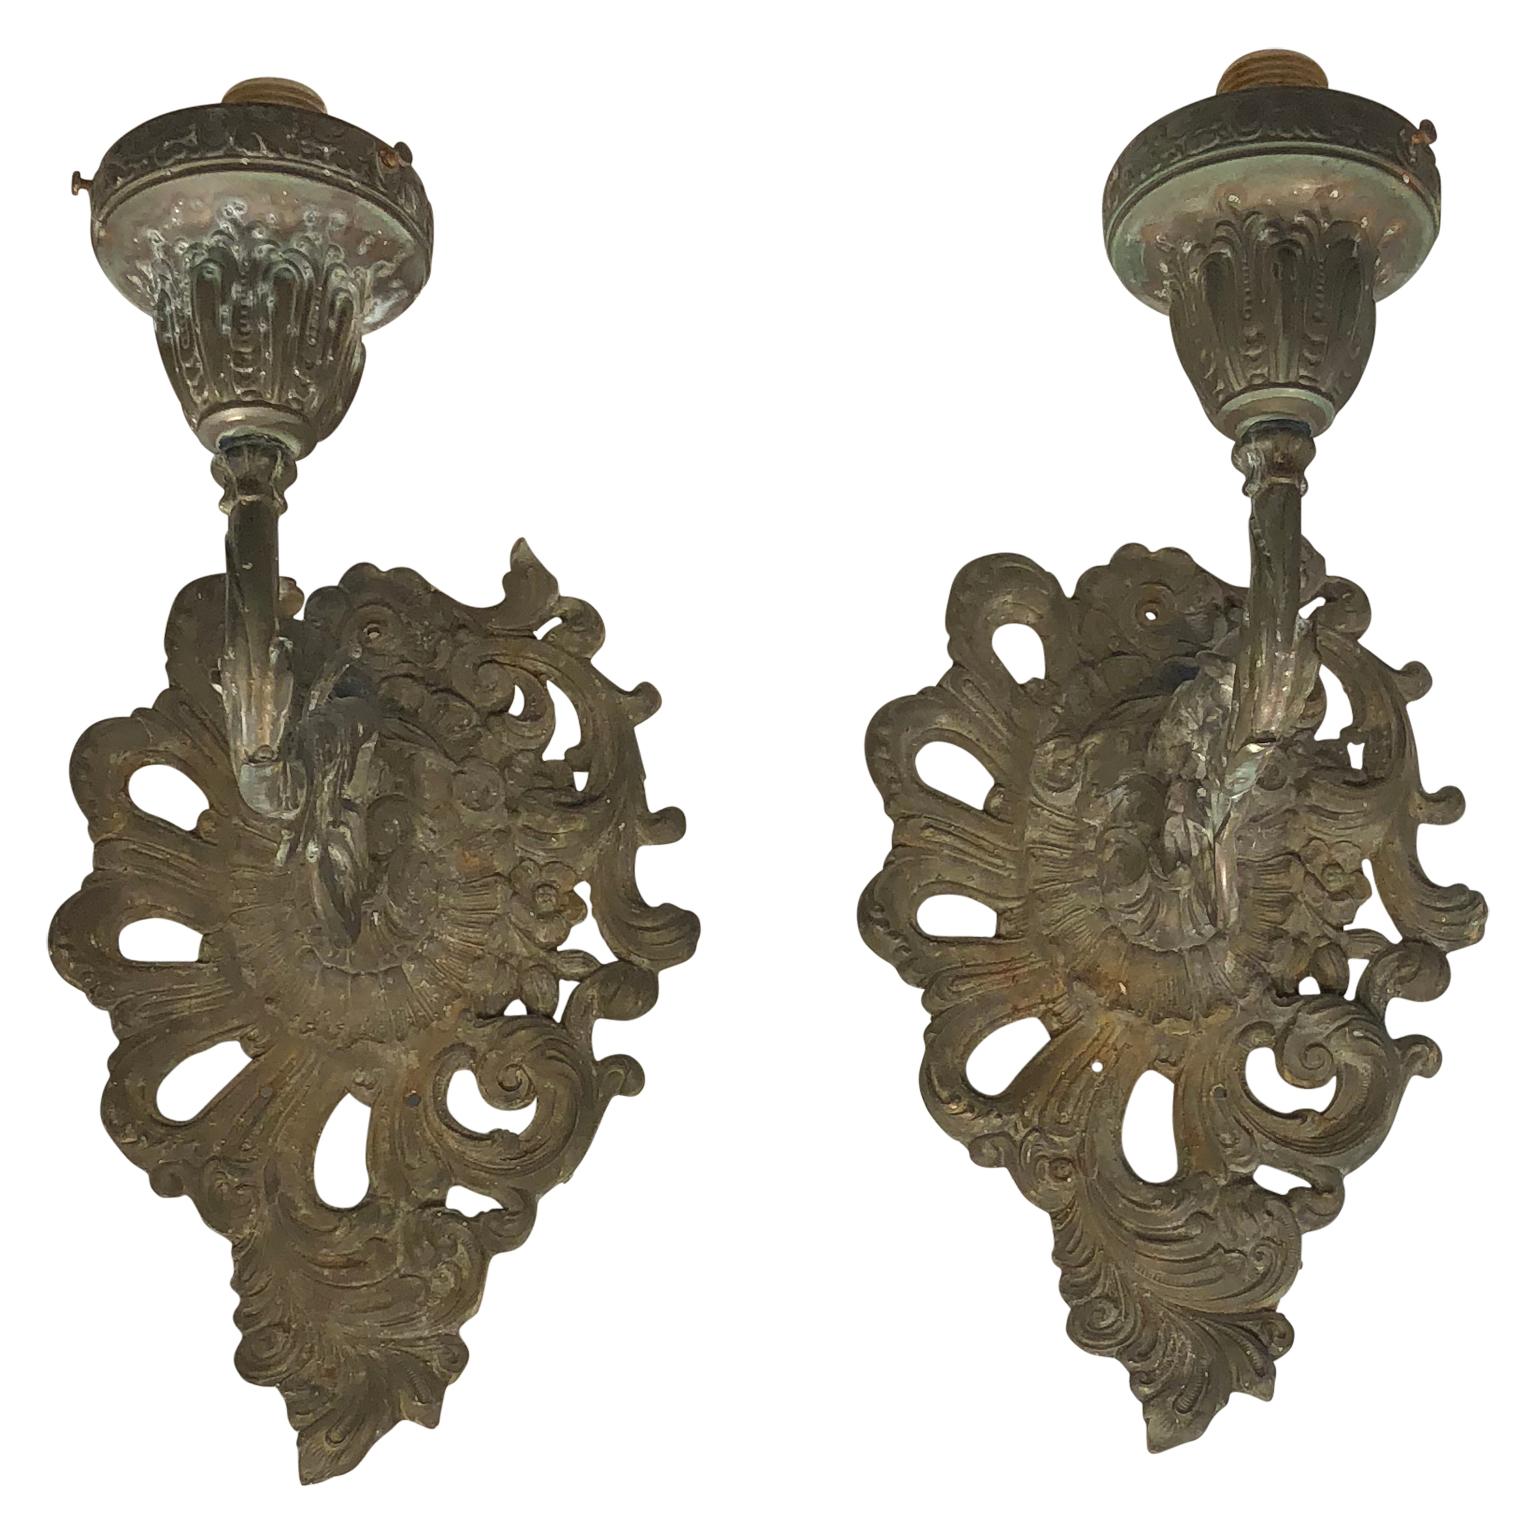 Pair of Iron Rococo wall sconces, brass.
The sconces are classic rococo gilded with scrolled design. Beautiful on a dining room or hallway wall, they make a statement any place in your home. 
Sconces will be newly electrified if needed before